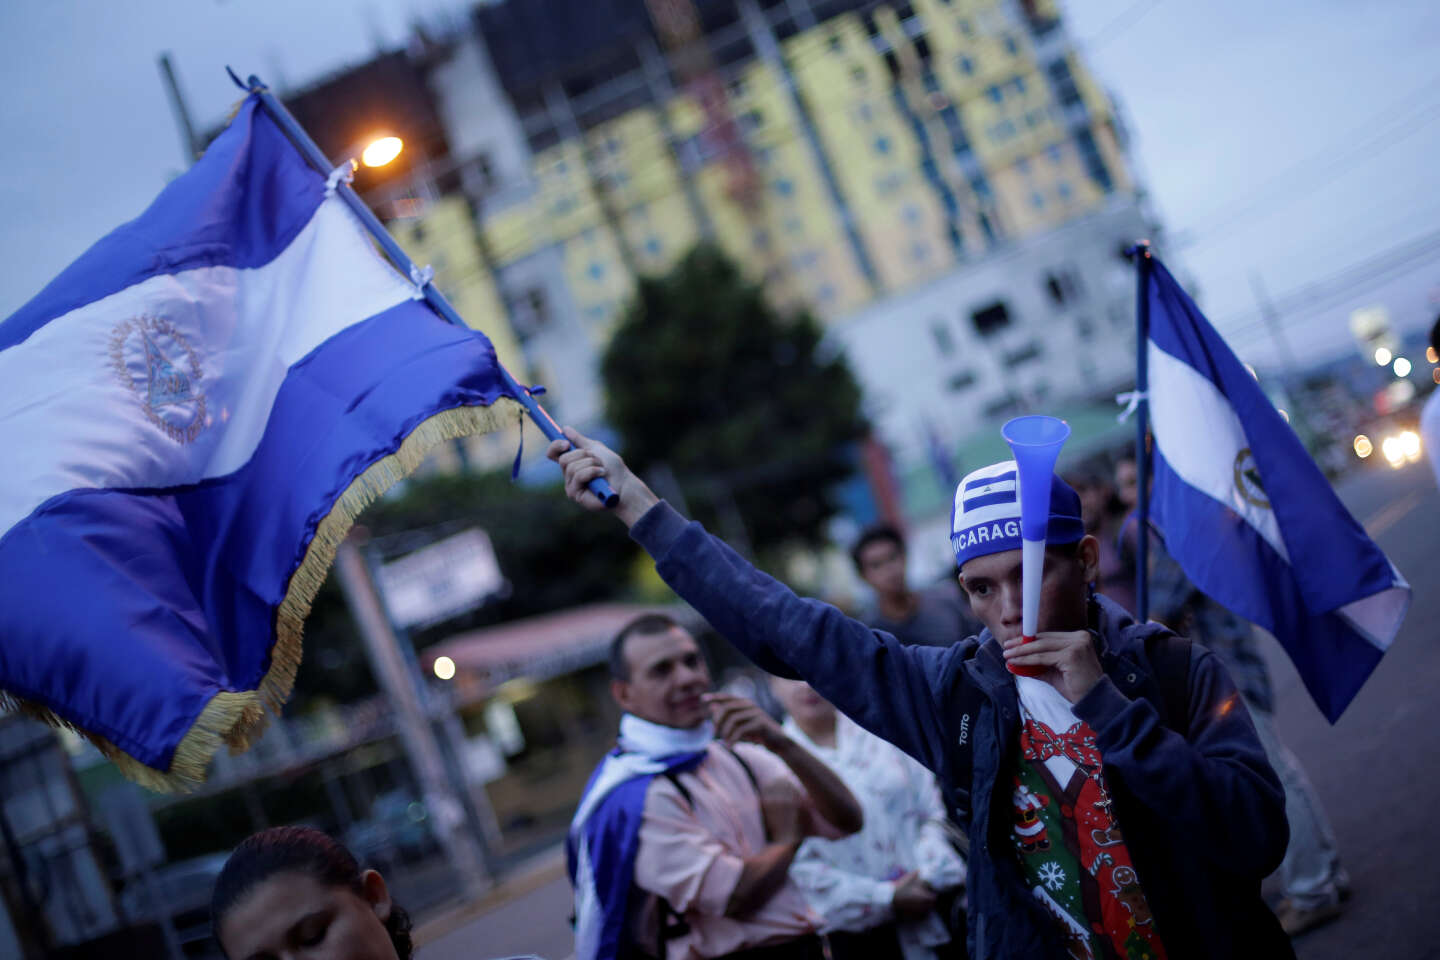 Concern over the fate of two French women arrested by police in Nicaragua